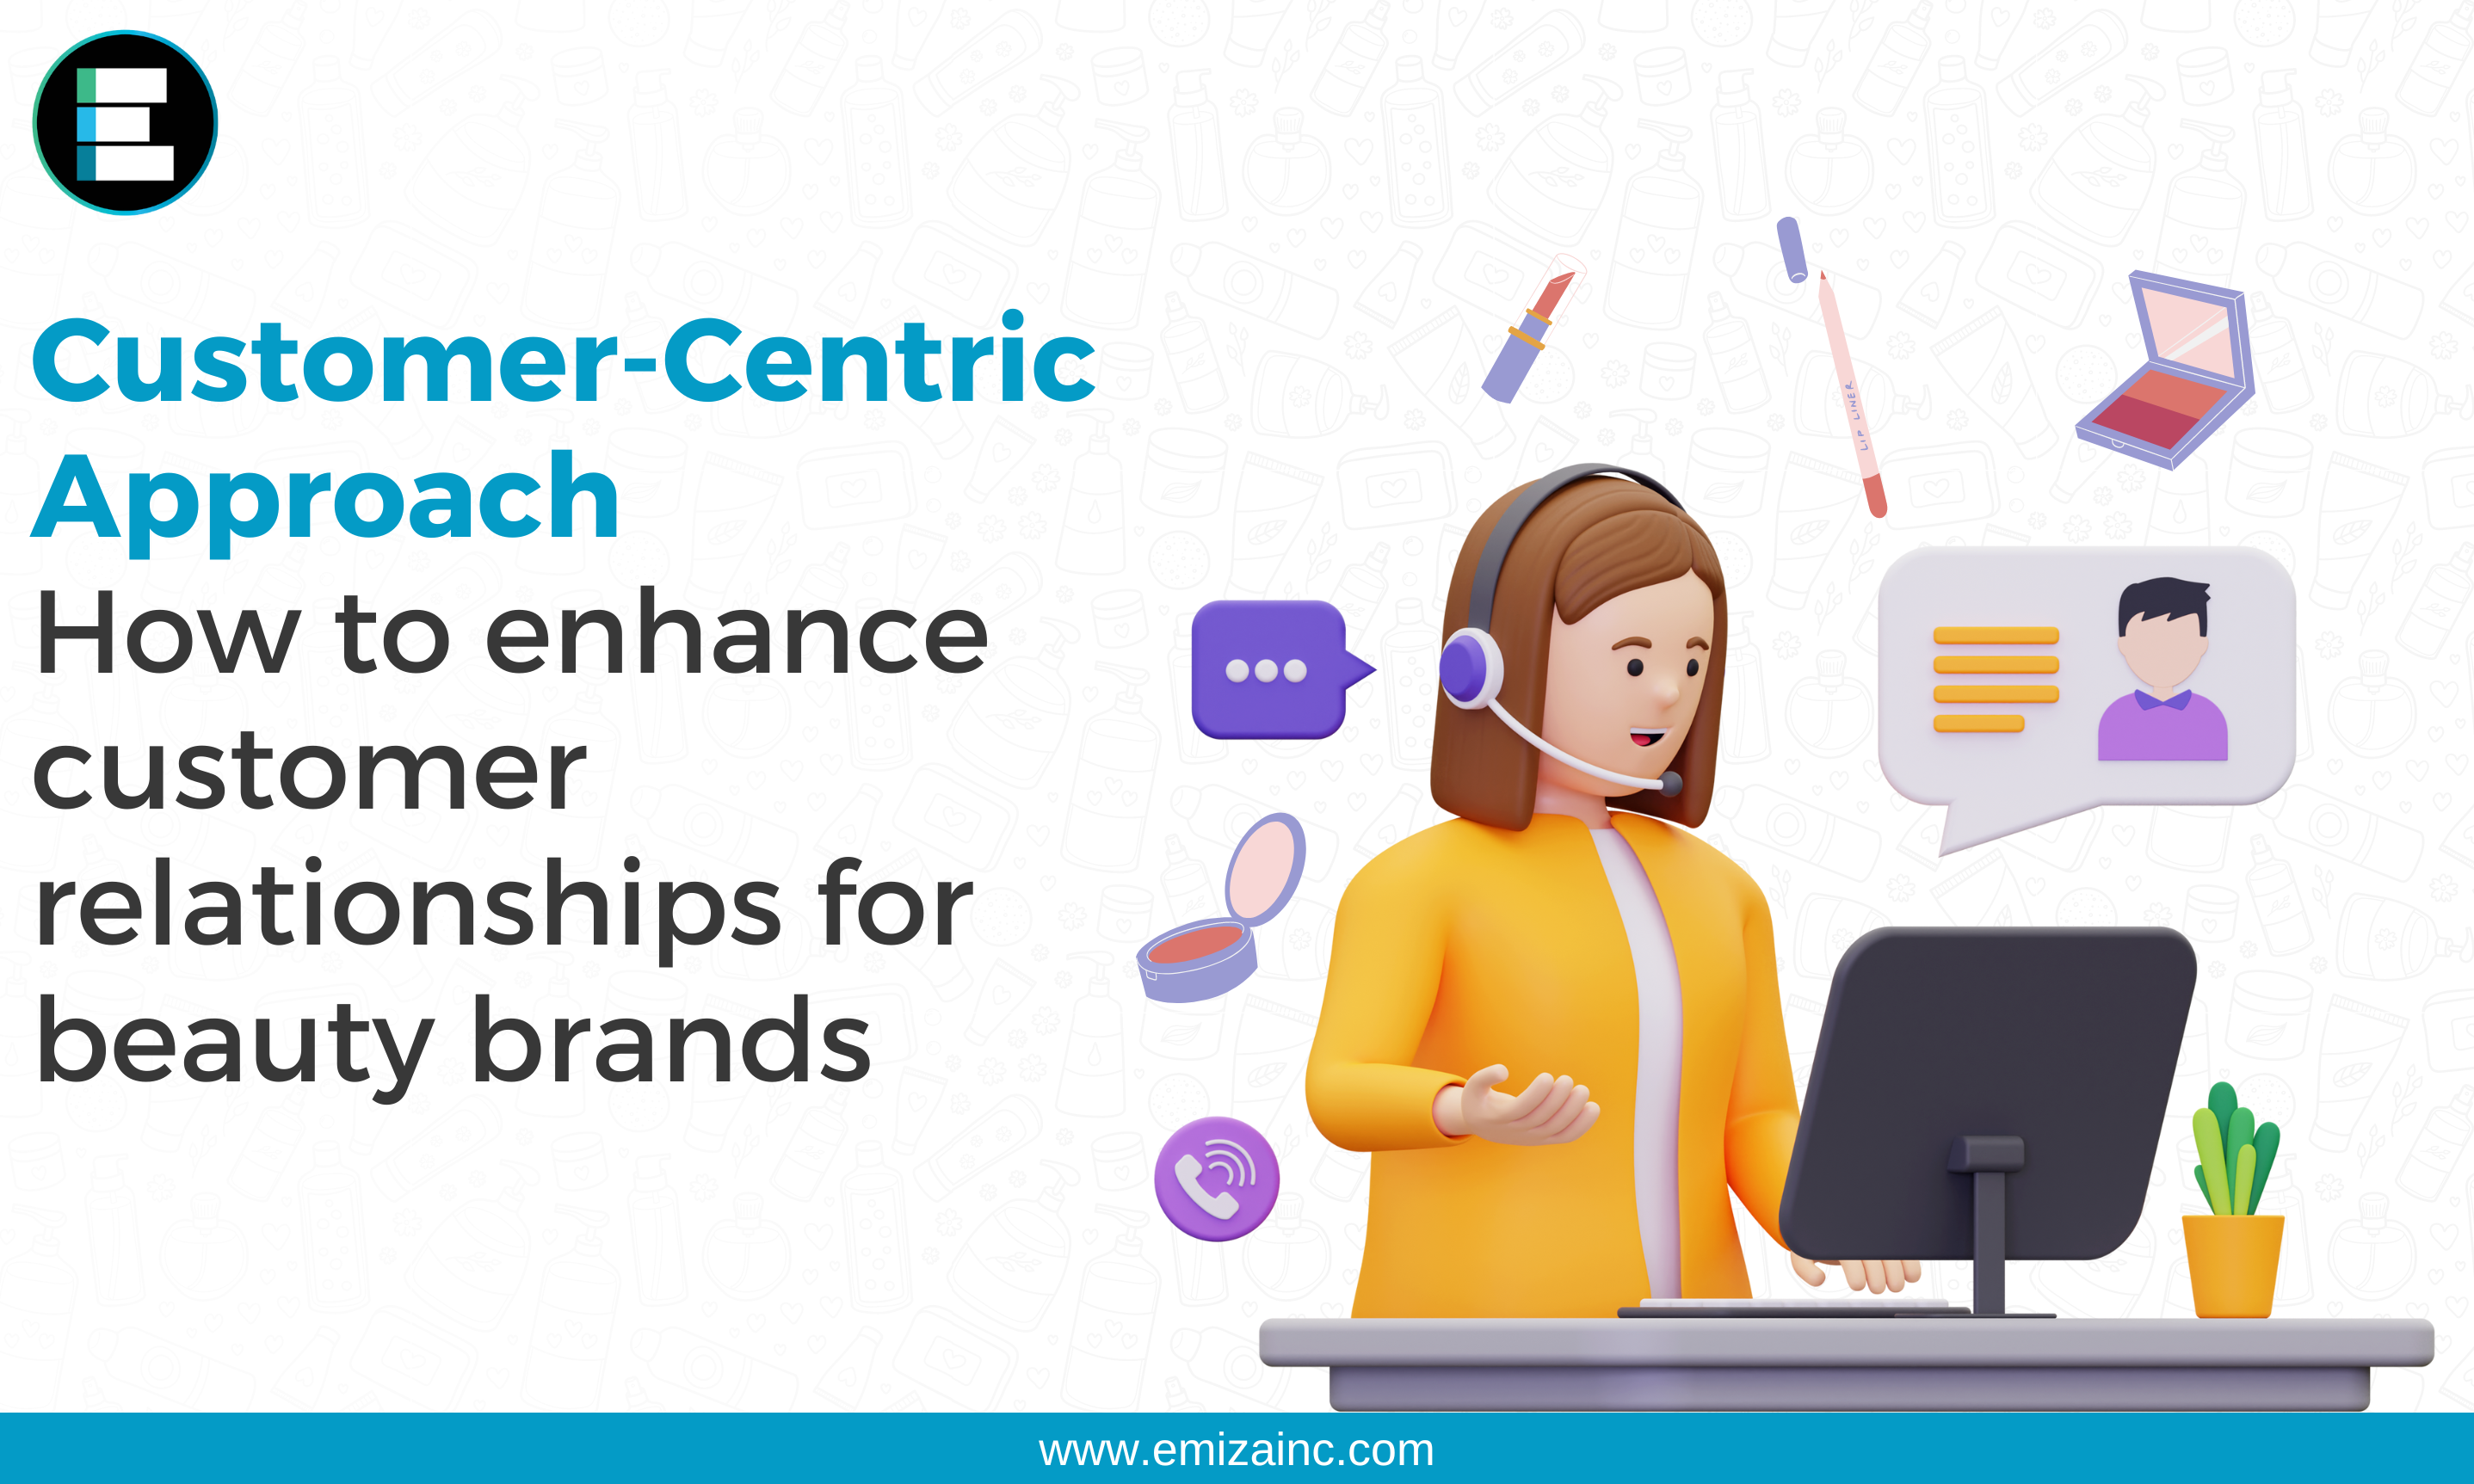 Customer-Centric Approach: Enhancing Customer Relationships for Beauty Brands